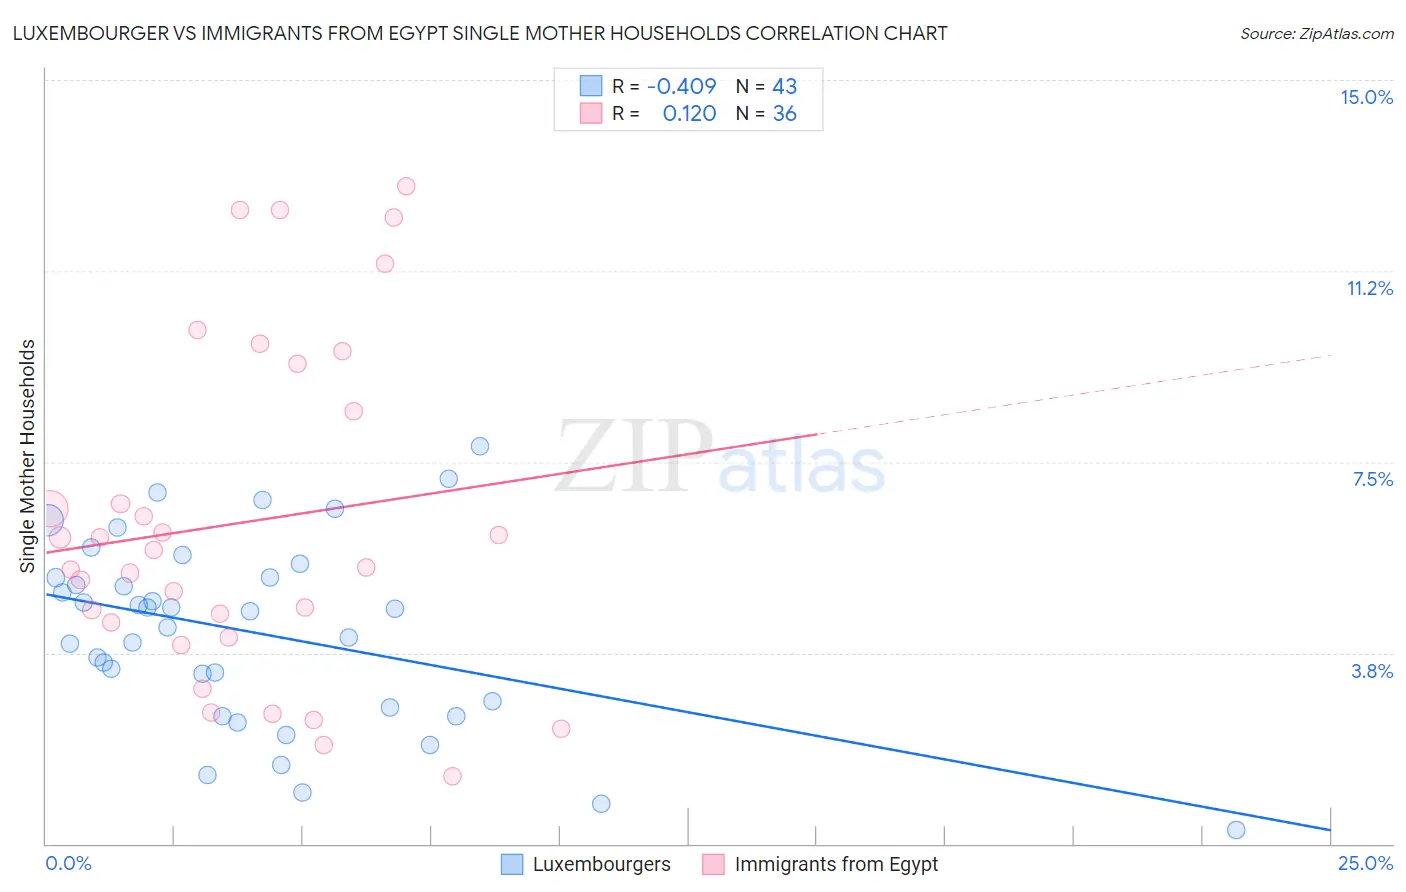 Luxembourger vs Immigrants from Egypt Single Mother Households